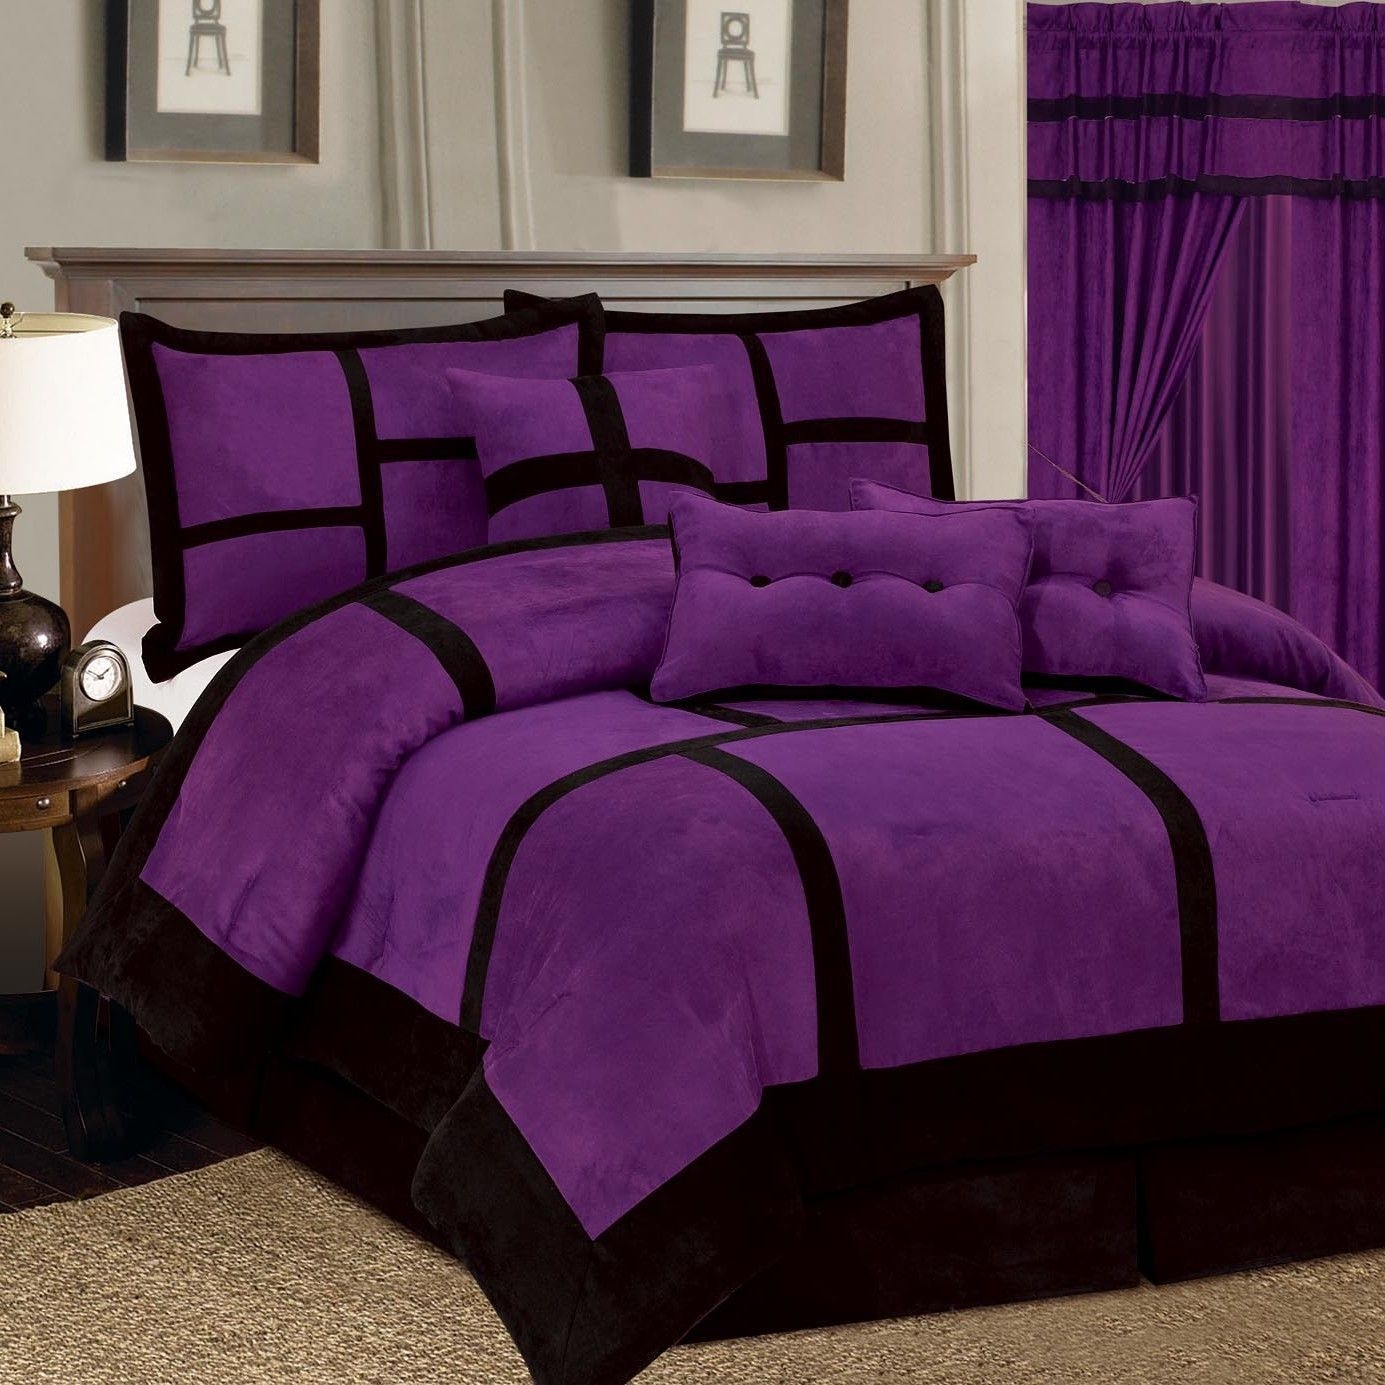 pink and purple bed sets